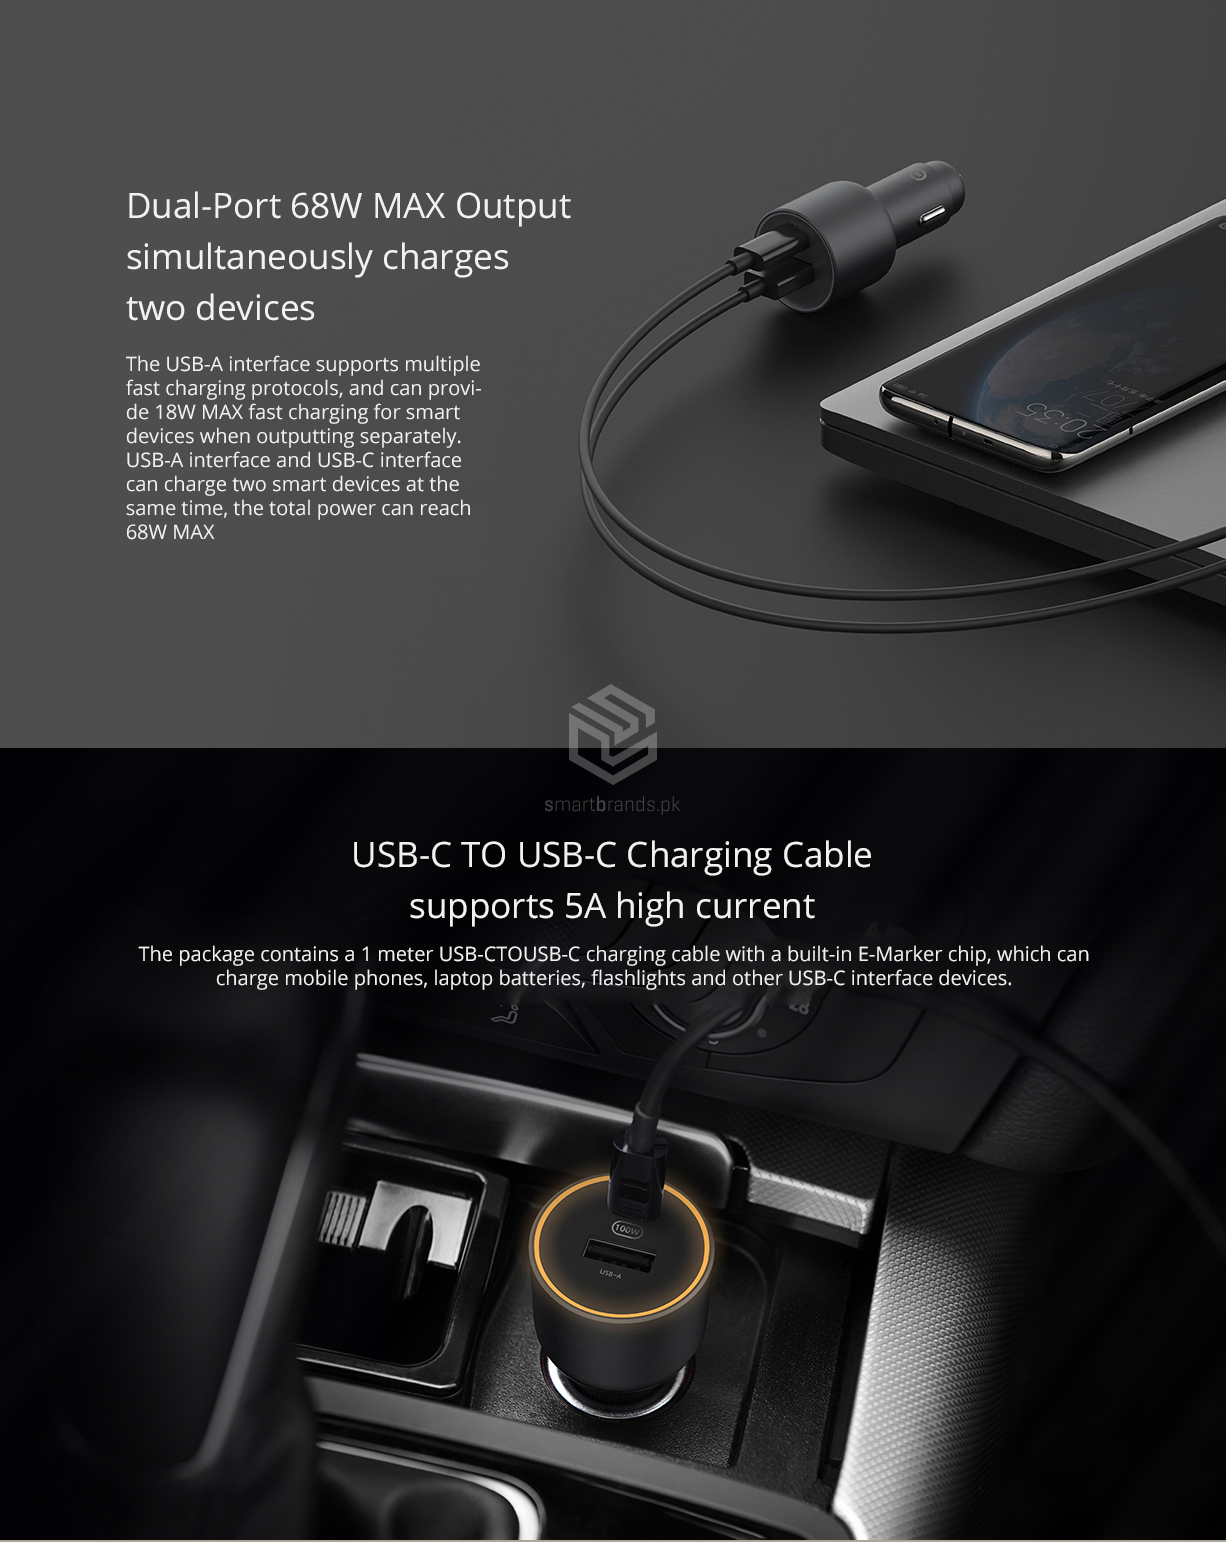 Dual-Port 68W MAX Output simultaneously charges two devices